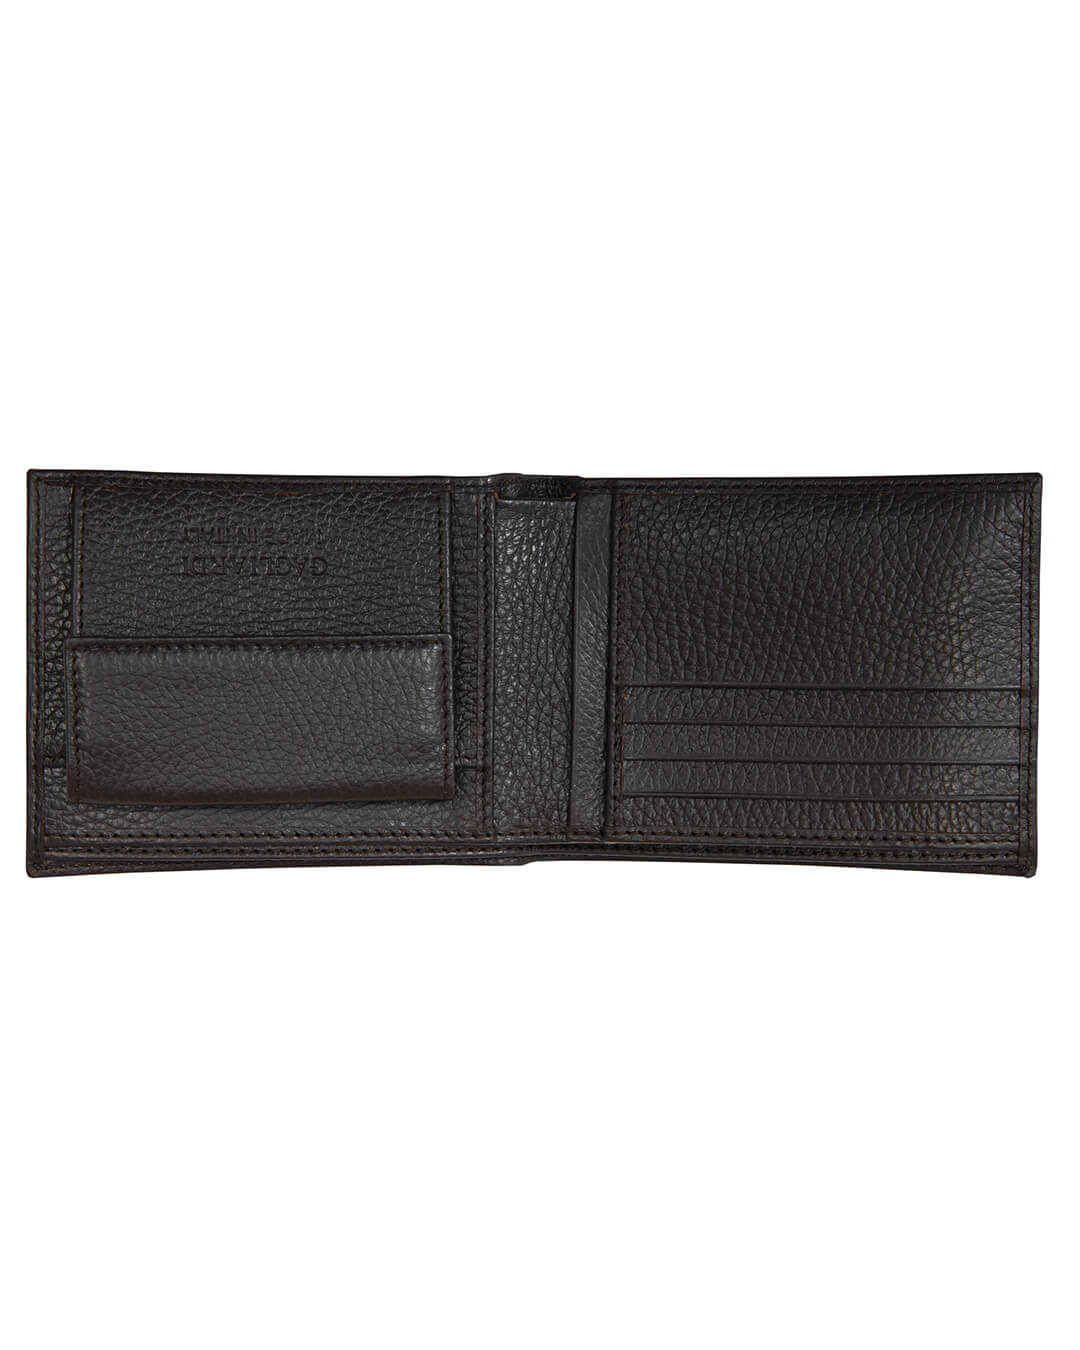 Gagliardi Wallets One Size Gagliardi Wallet Brown Leather With Coin Pocket